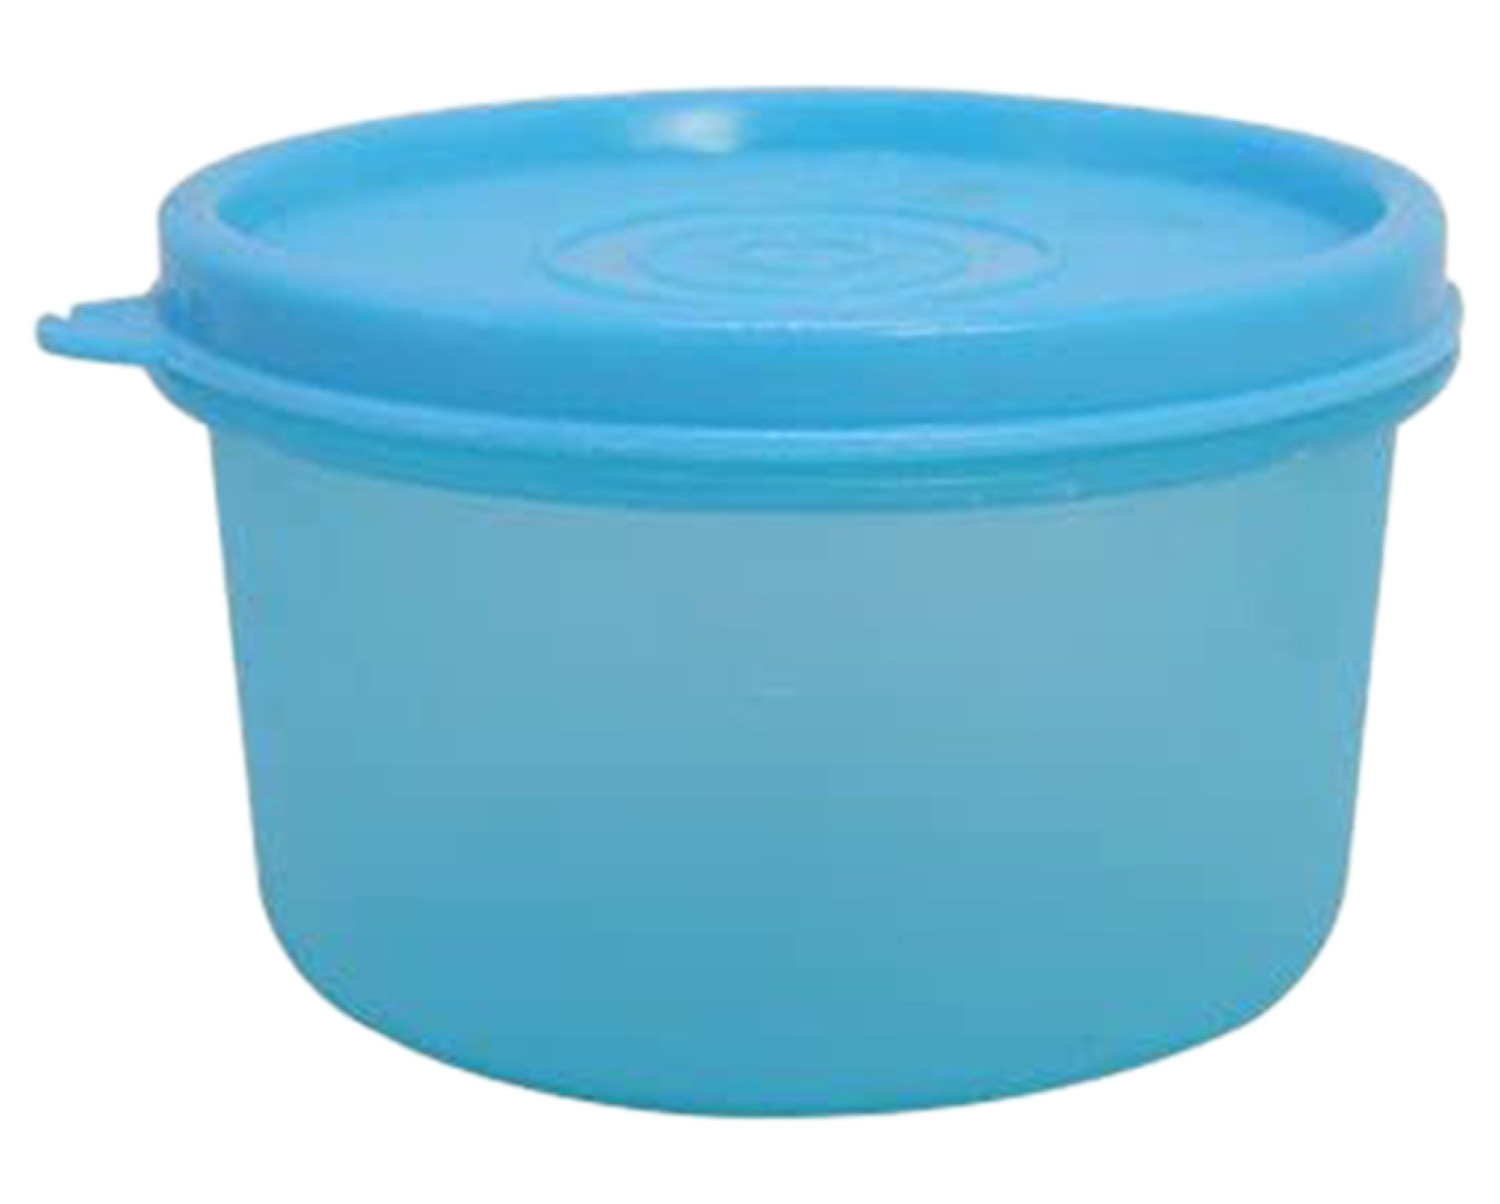 Kuber Industries 2 Plastic Containers Lunch Box Set With Cover (Sky Blue)